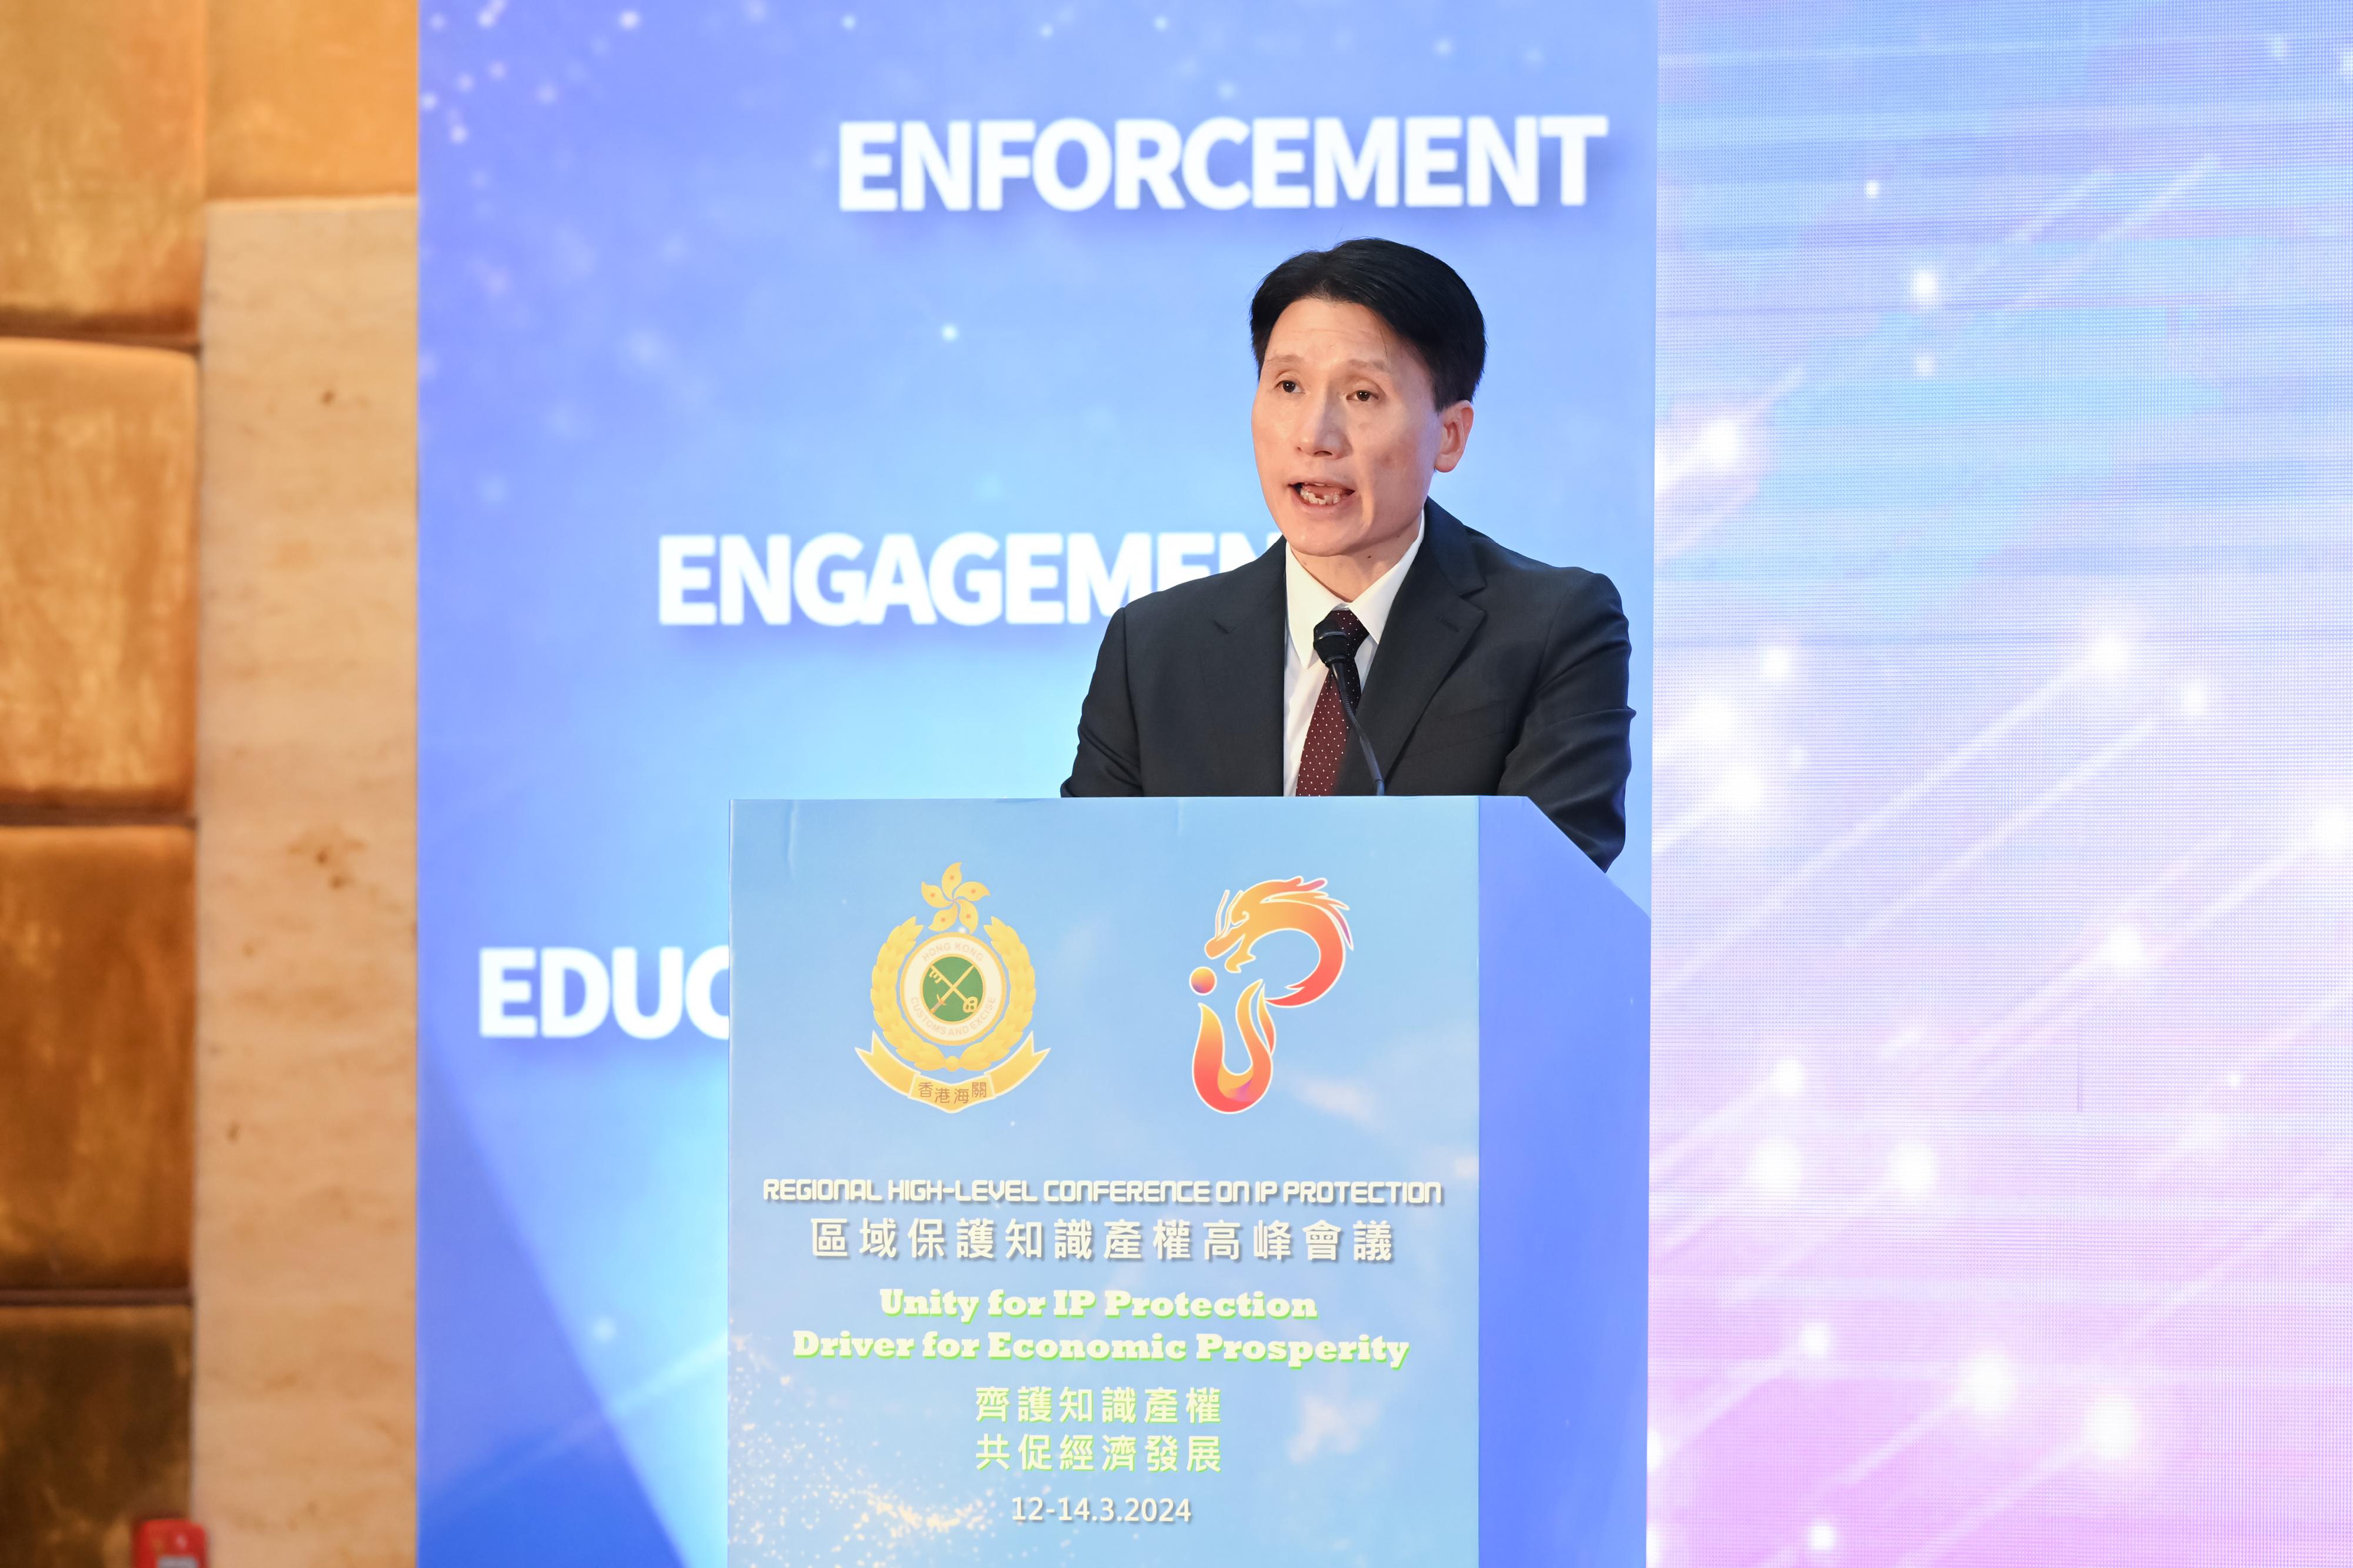 The Deputy Commissioner (Control and Enforcement) of Customs and Excise, Mr Mark Woo, today (March 14) gave closing remarks to conclude the results yielded at the Regional High-Level Conference on IP Protection held by Hong Kong Customs.